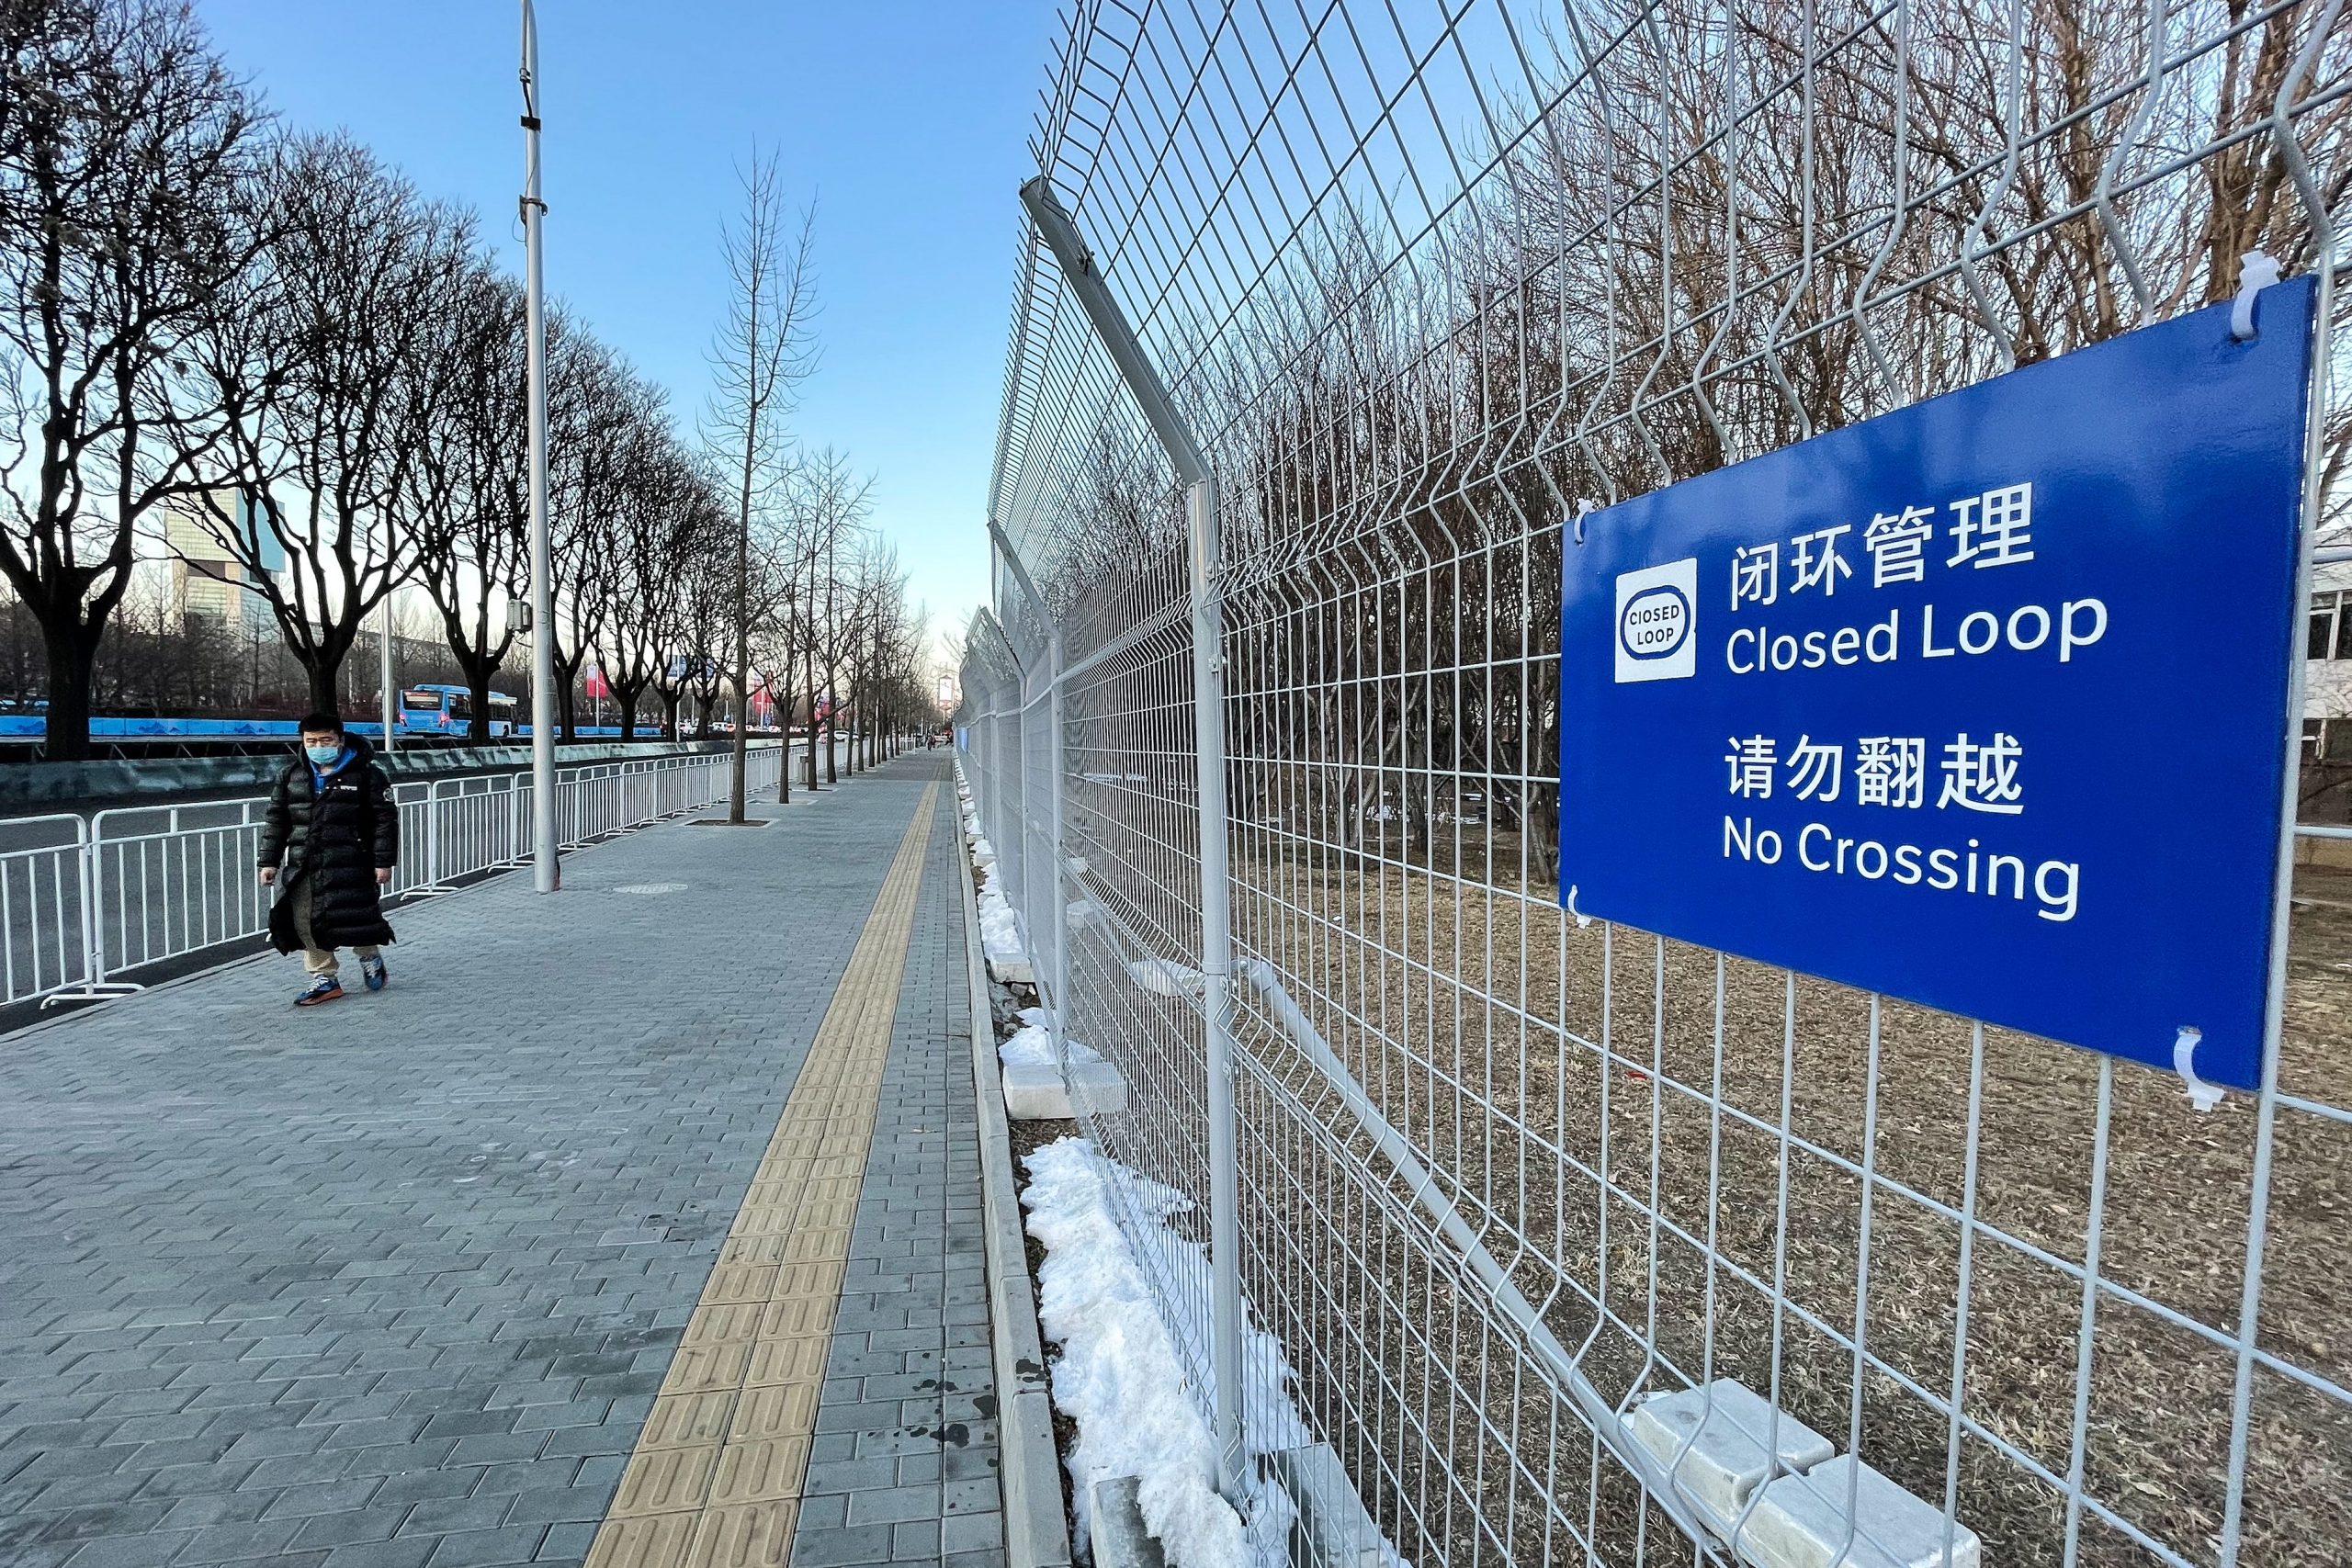 The 2022 Beijing Winter Olympics will operate a "closed loop" policy.